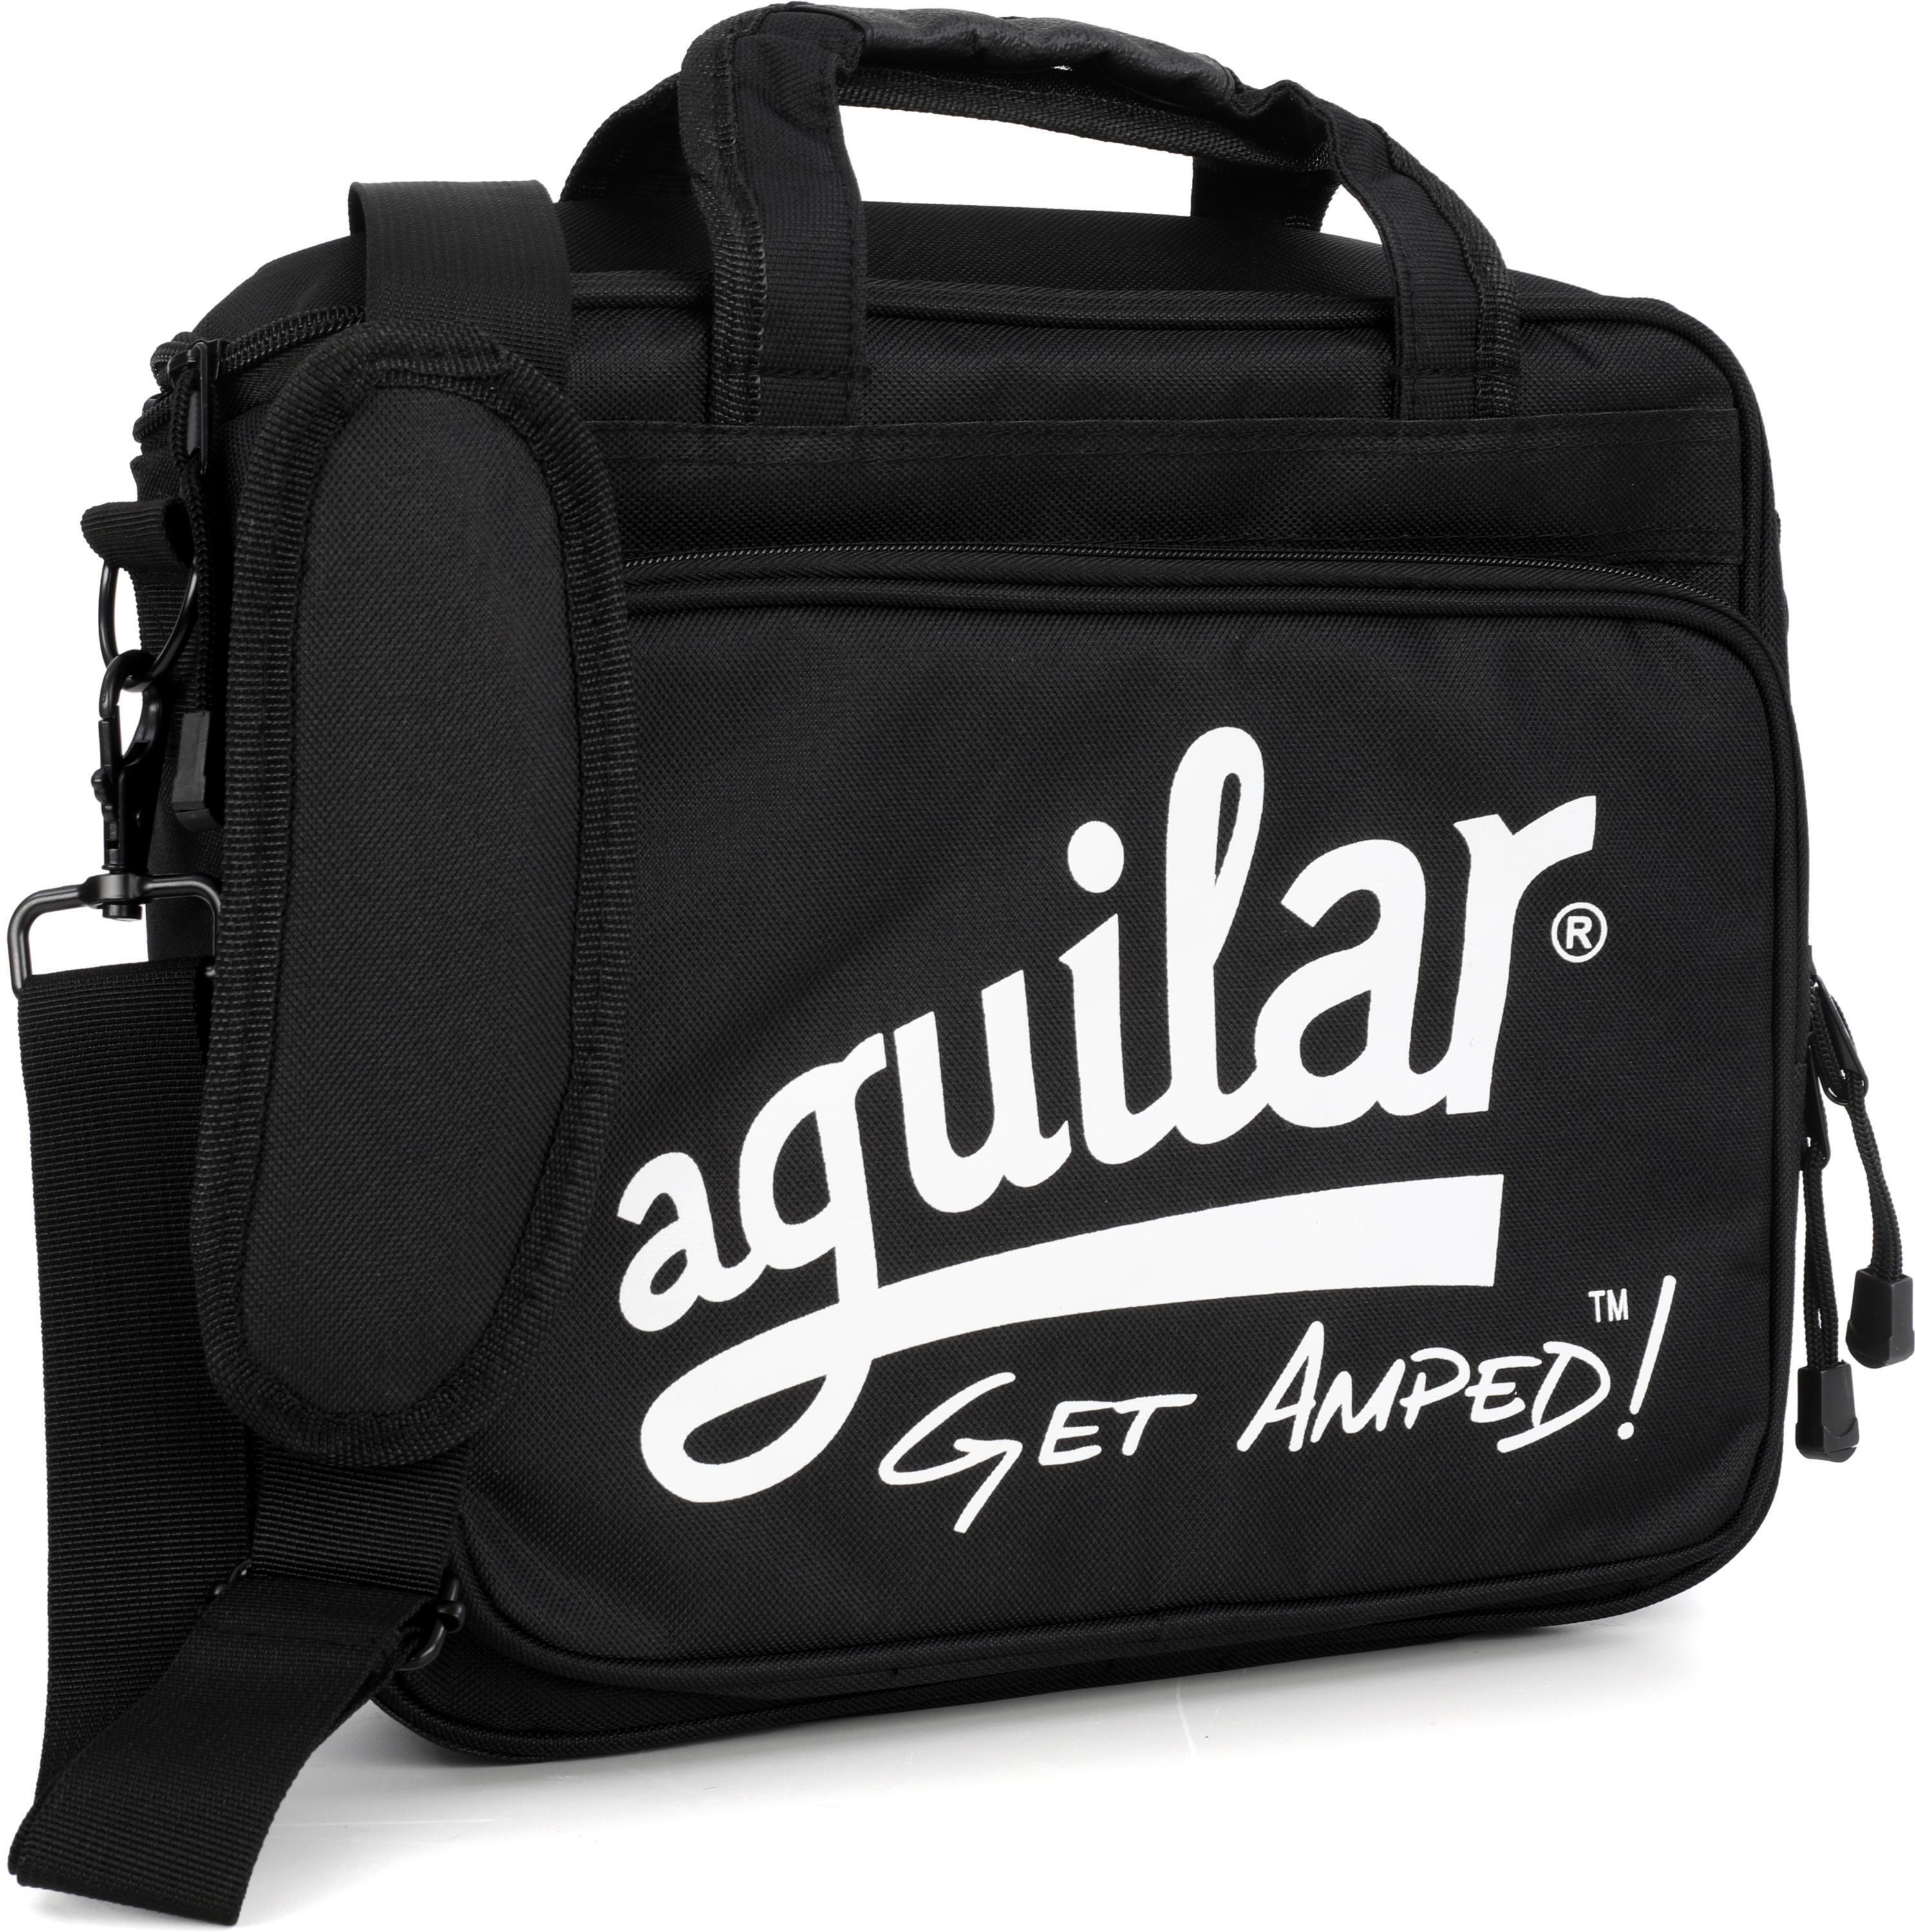 Gray Carry Bag in Chandigarh at best price by Abhay Print & Solution -  Justdial